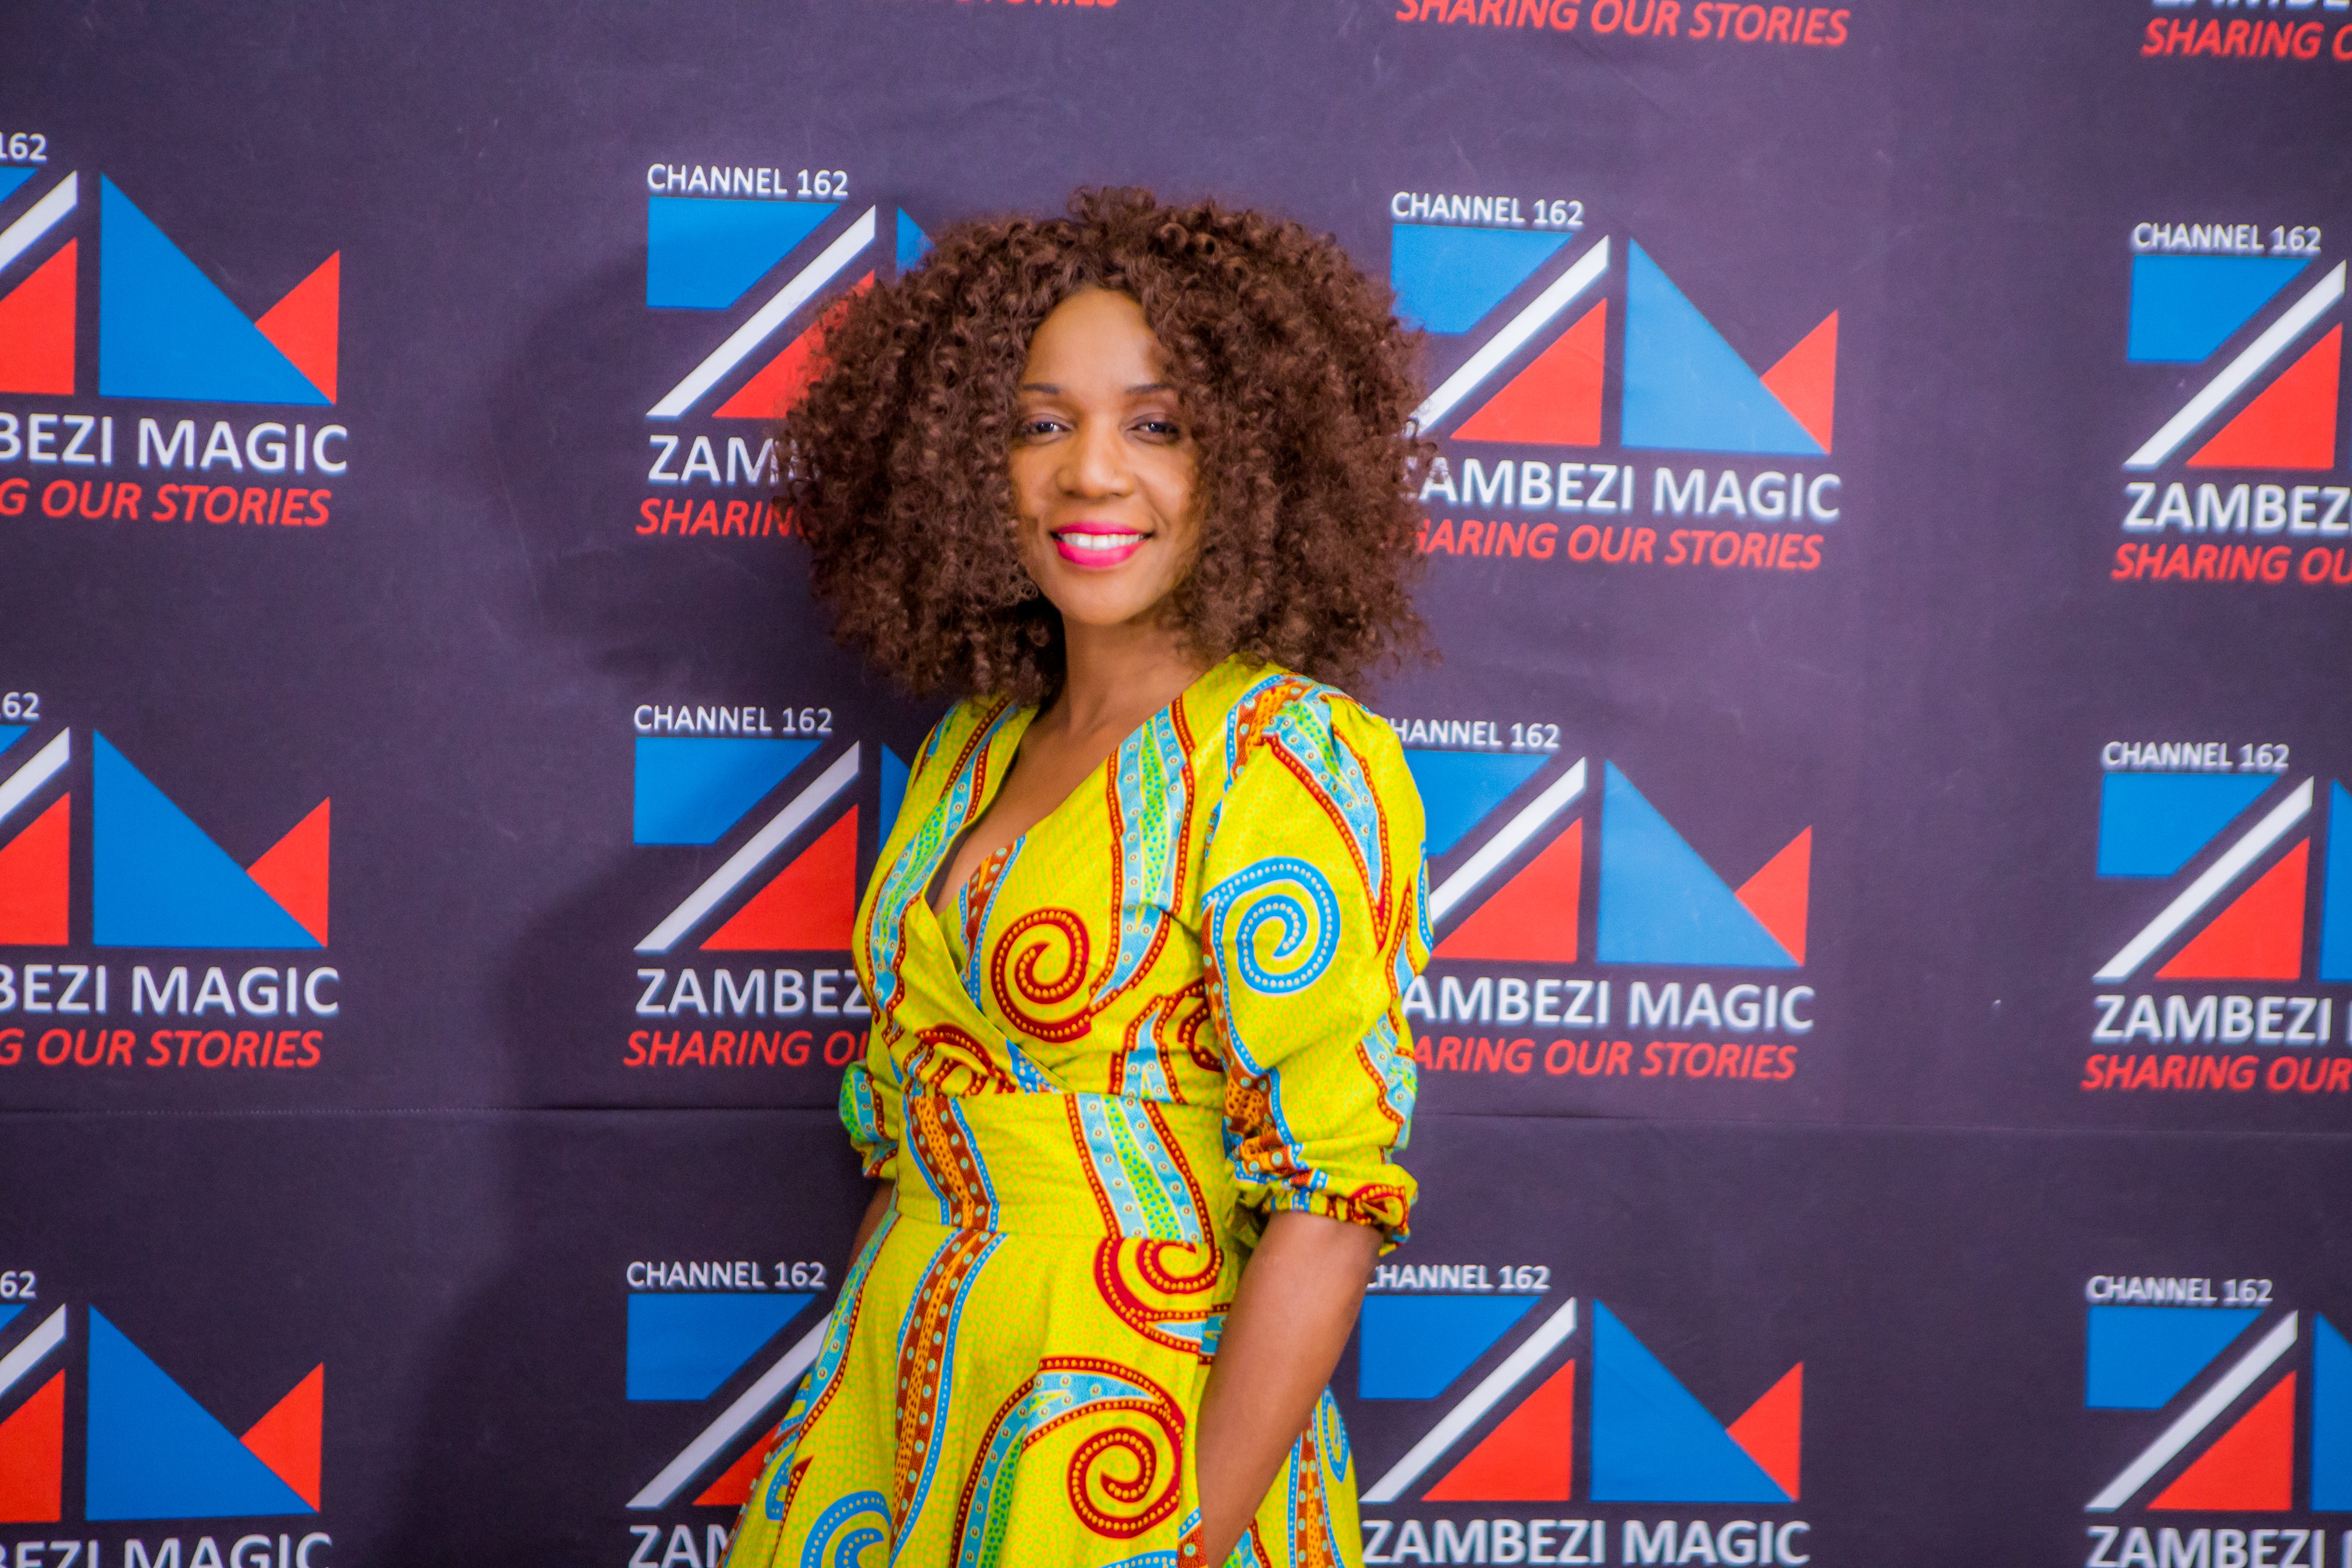 Africa’s most-loved storyteller shares exciting content plans for 2020